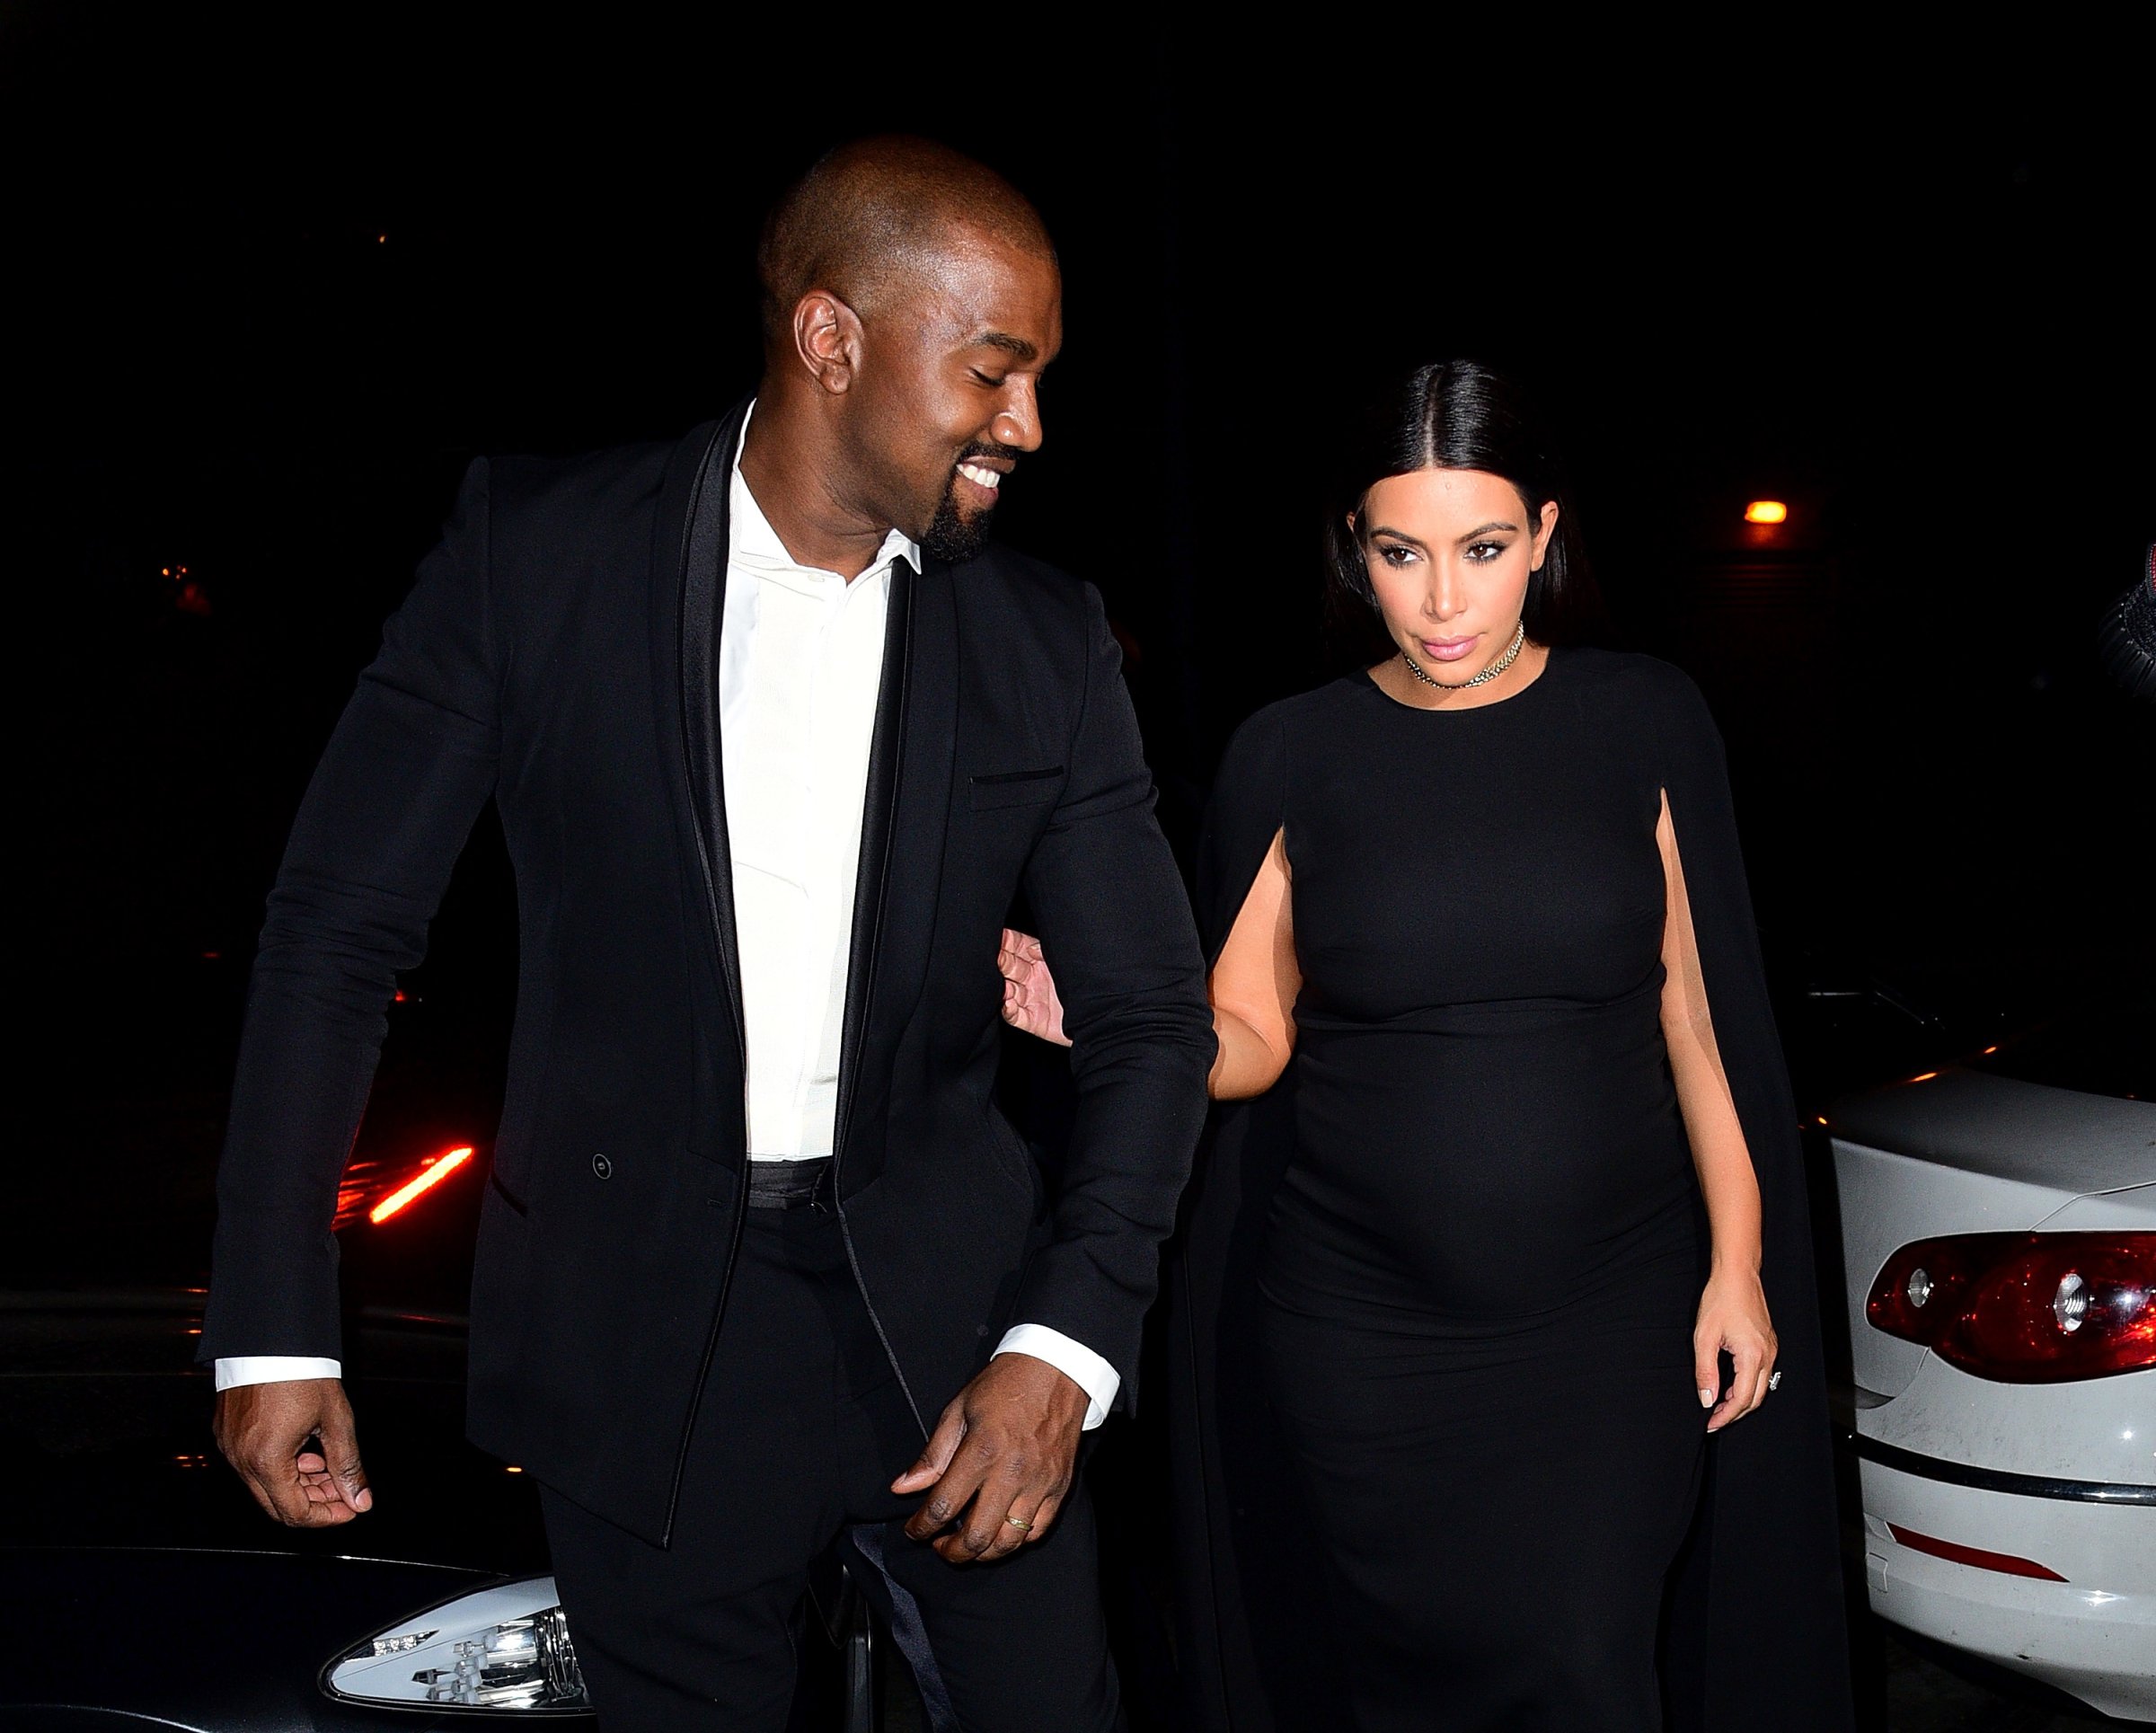 NEW YORK, NY - SEPTEMBER 07:  Kanye West and Kim Kardashian seen on the streets of Manhattan on September 7, 2015 in New York City.  (Photo by James Devaney/GC Images)